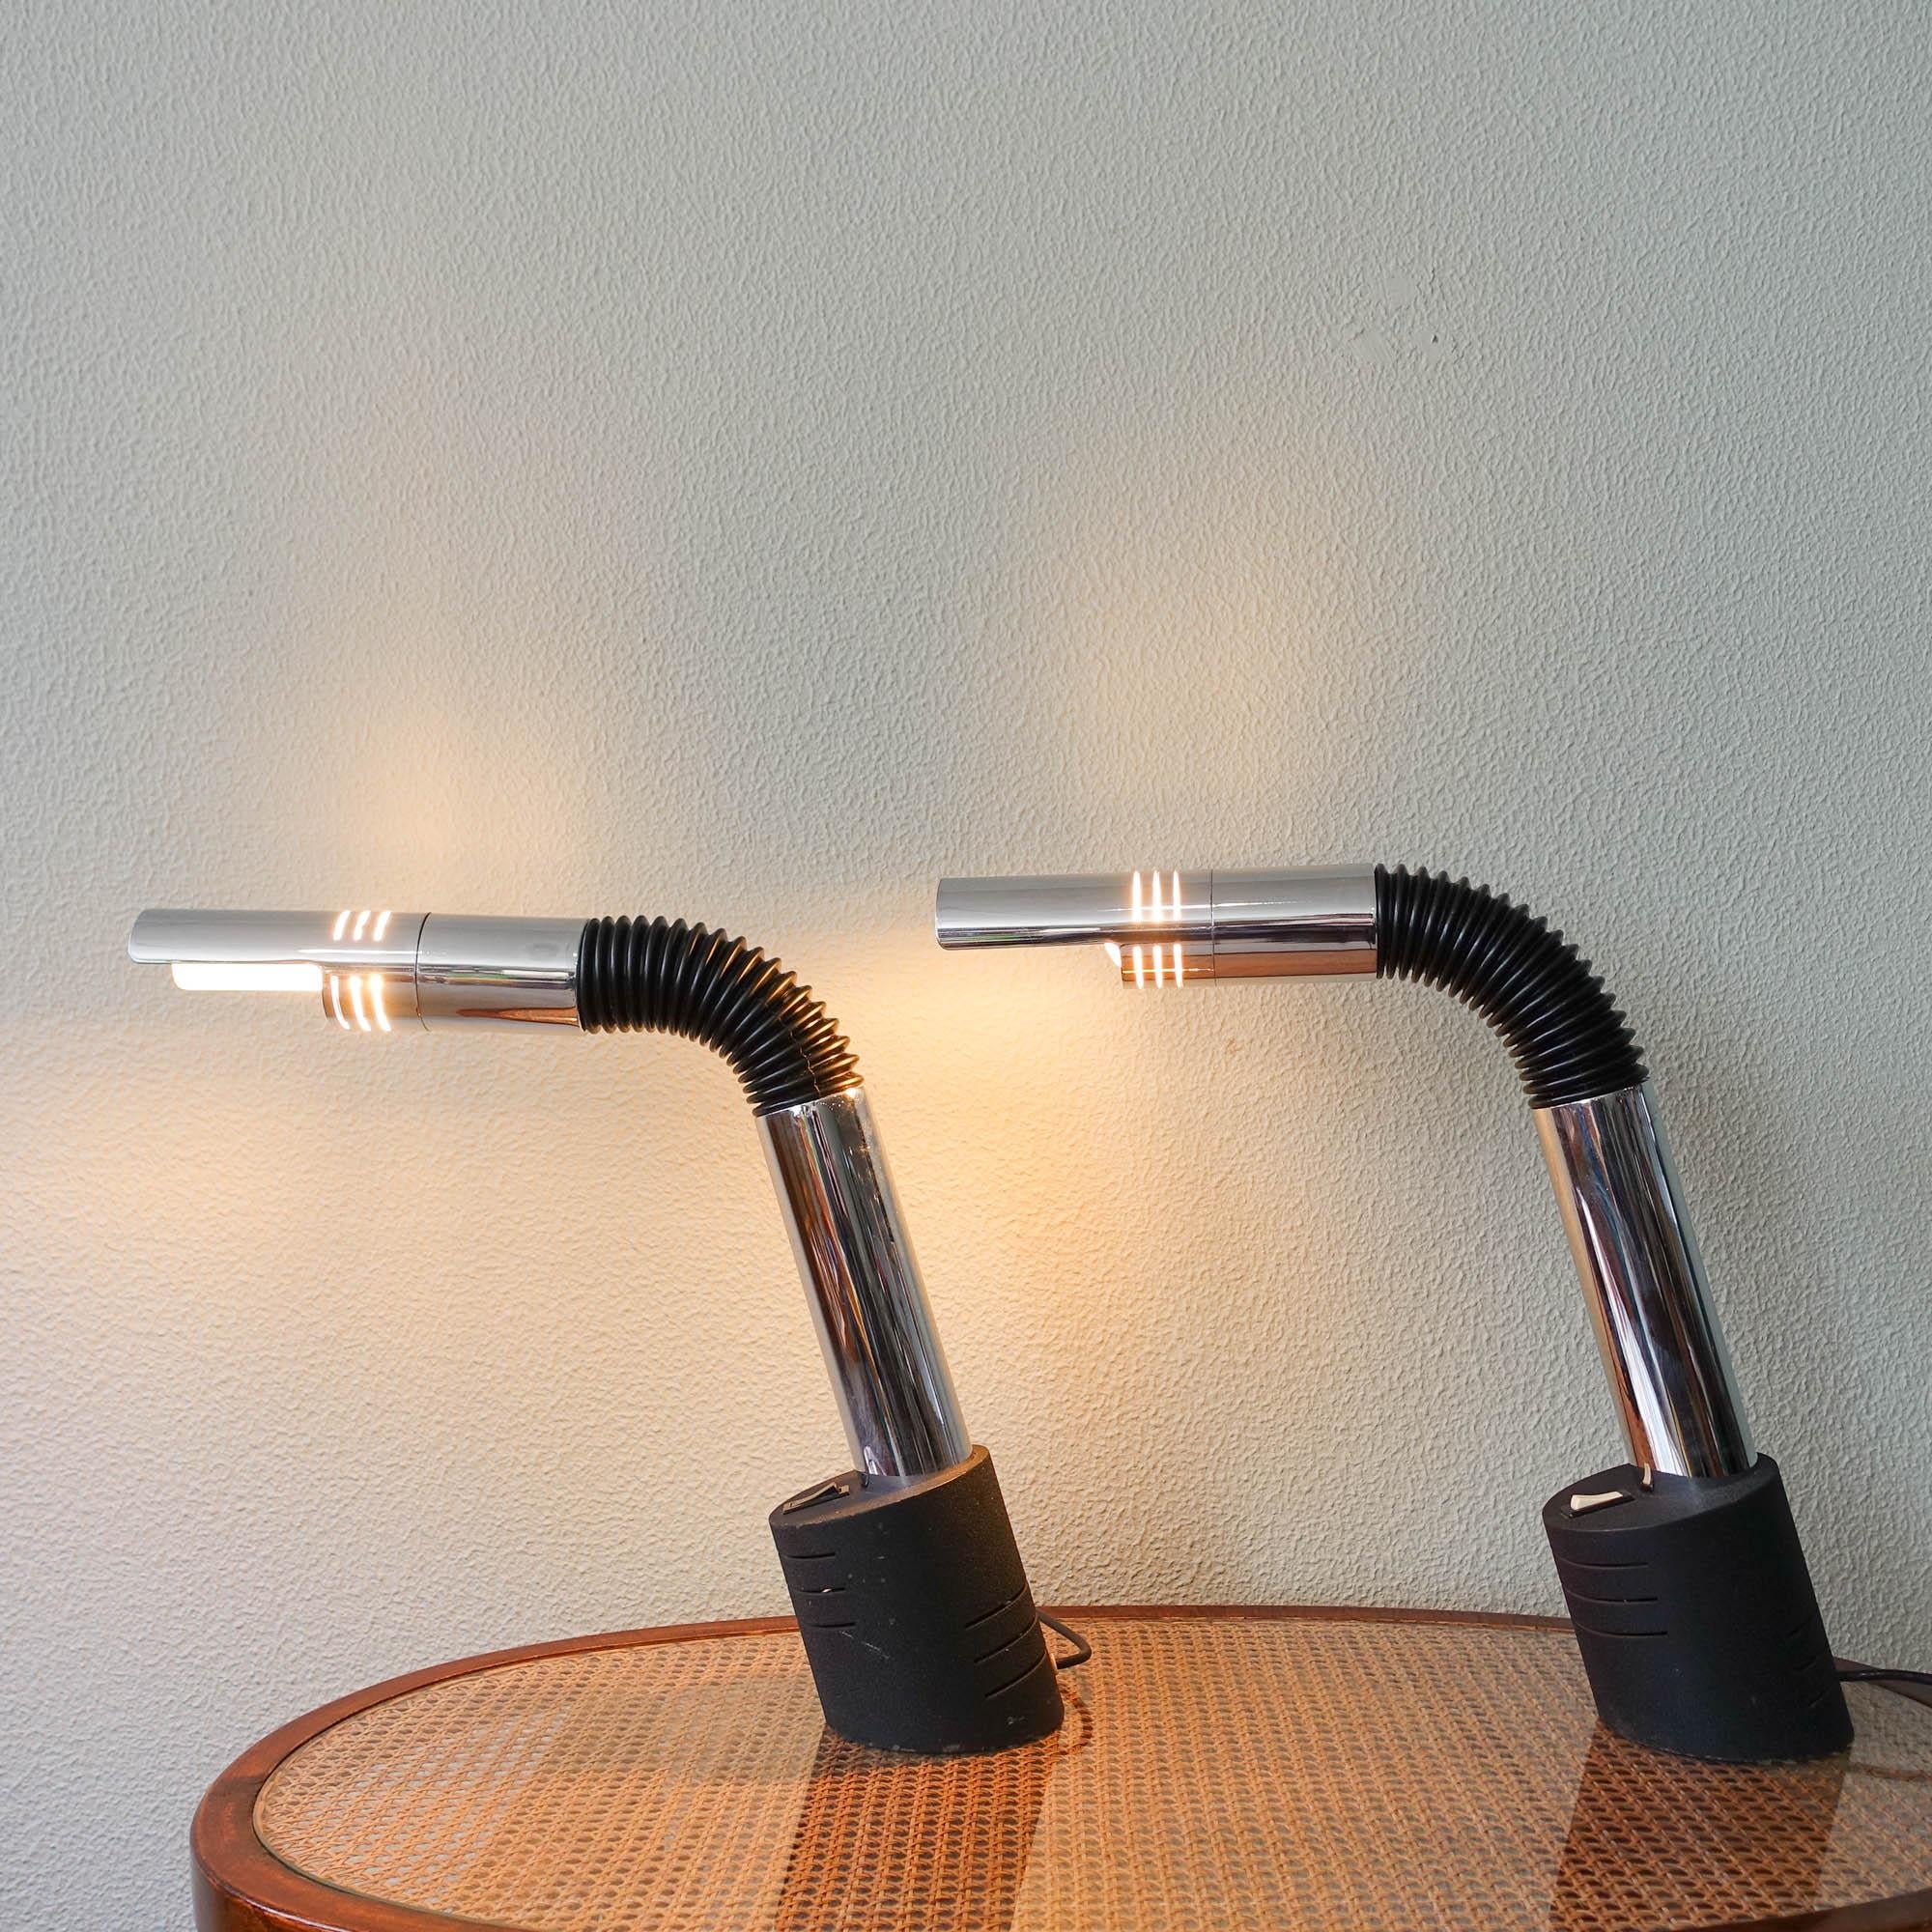 Mid-Century Modern Pair of “Elbow” Table Lamp by E. Bellini for Targetti Sankey, 1970s For Sale